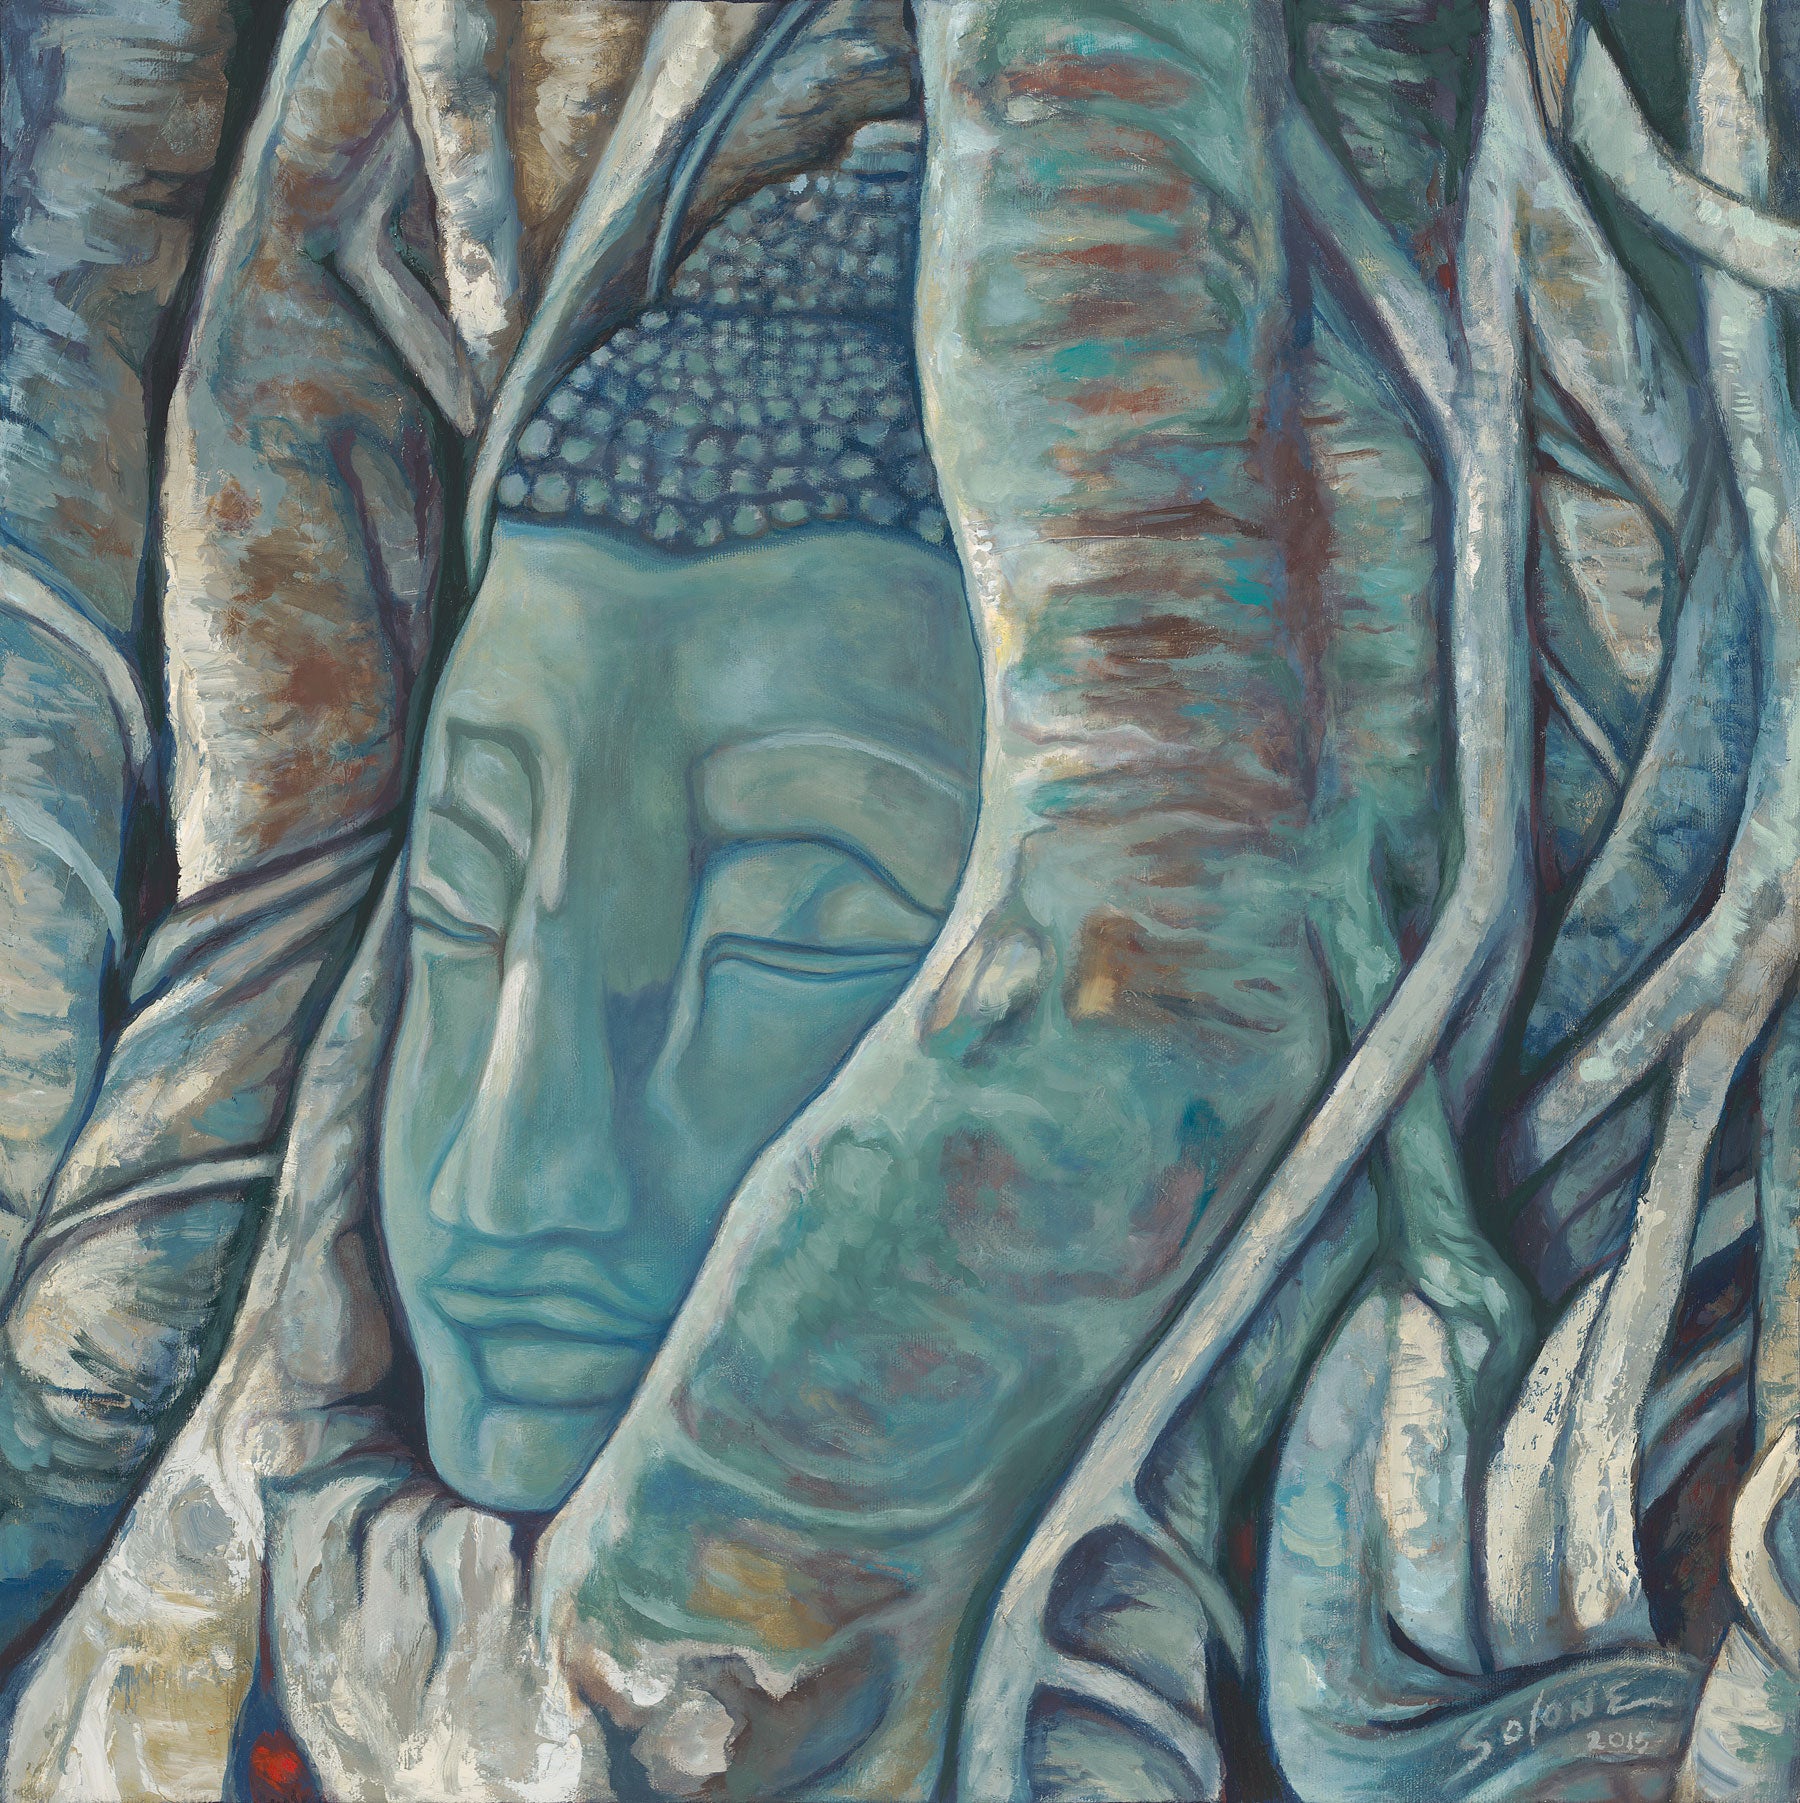 Painting of a buddha head statue with tree roots growing around it.